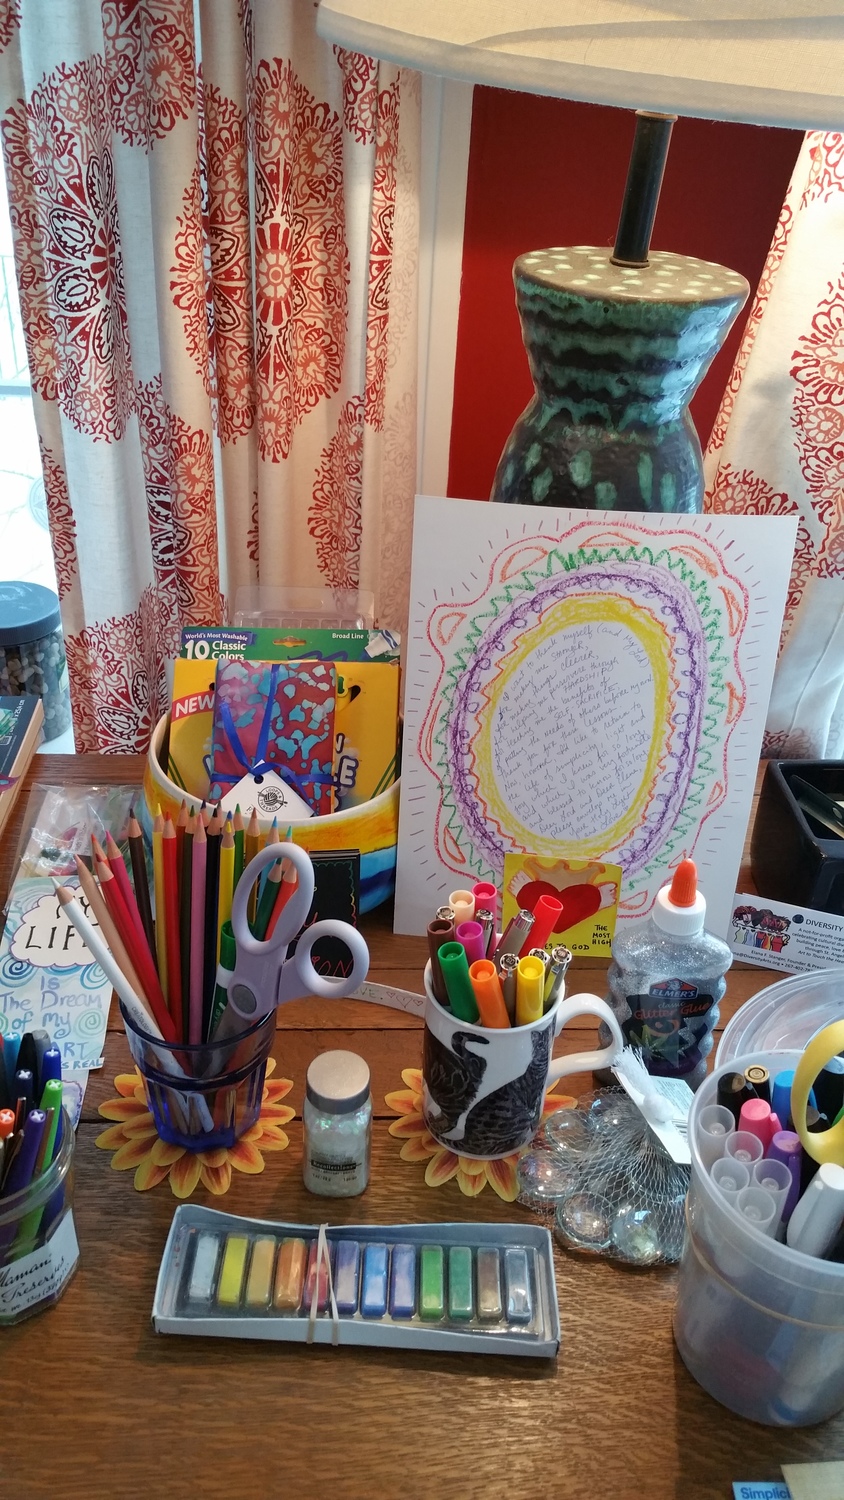 Gallery Photo of Including art in the therapeutic process, whether painting or collage, poetry or movement, may yield very positive results for healing.